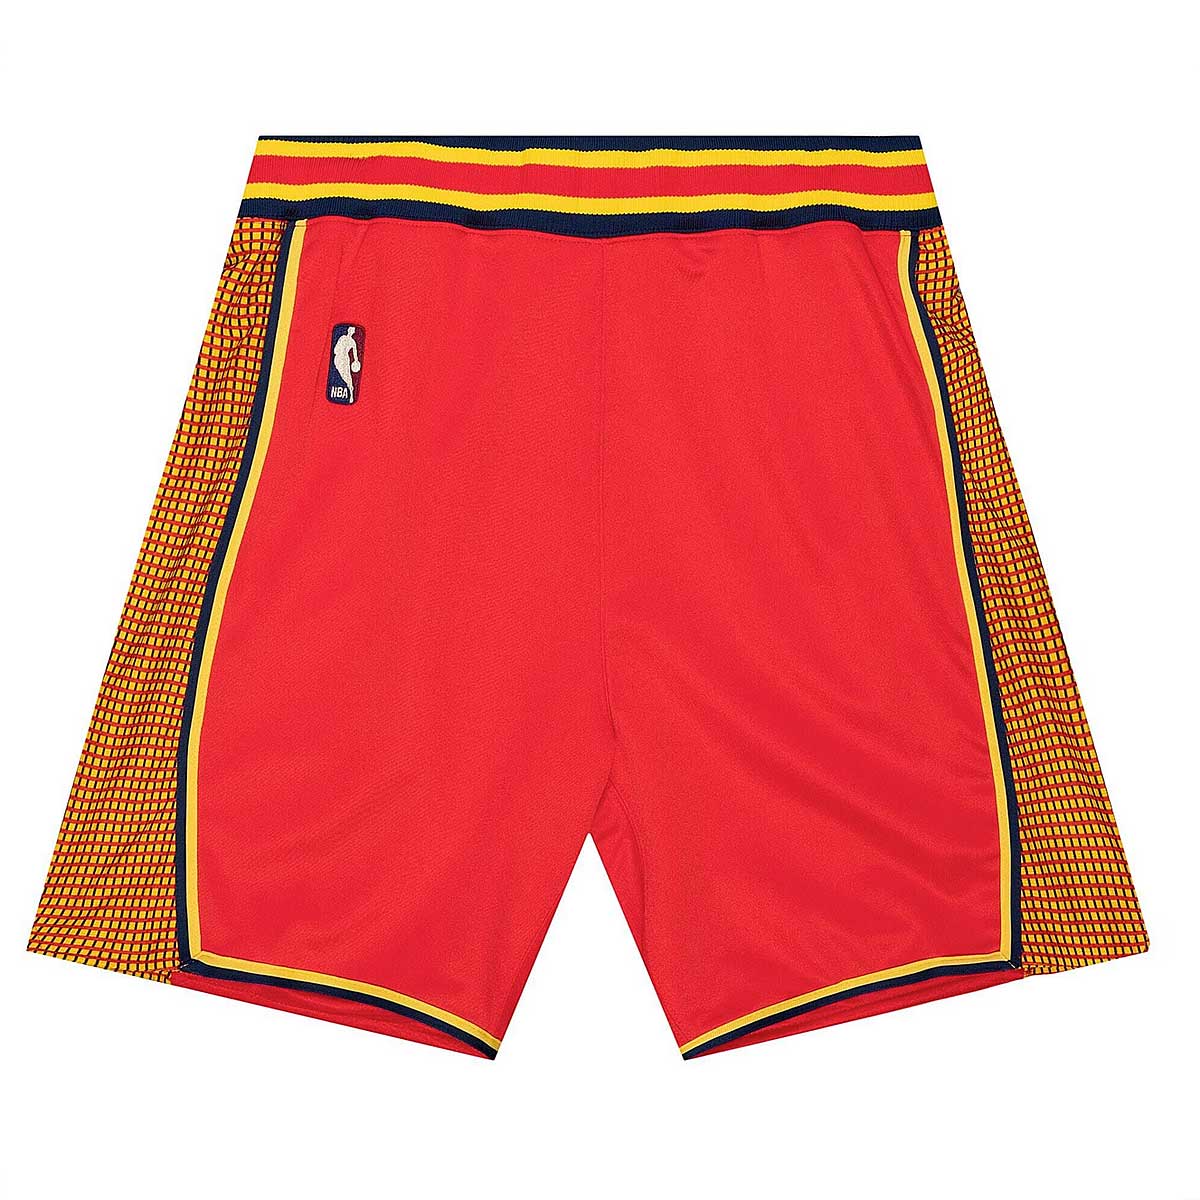 Mitchell And Ness Nba Philadelphia 76Ers 2004 Authentic Shorts, Light Red